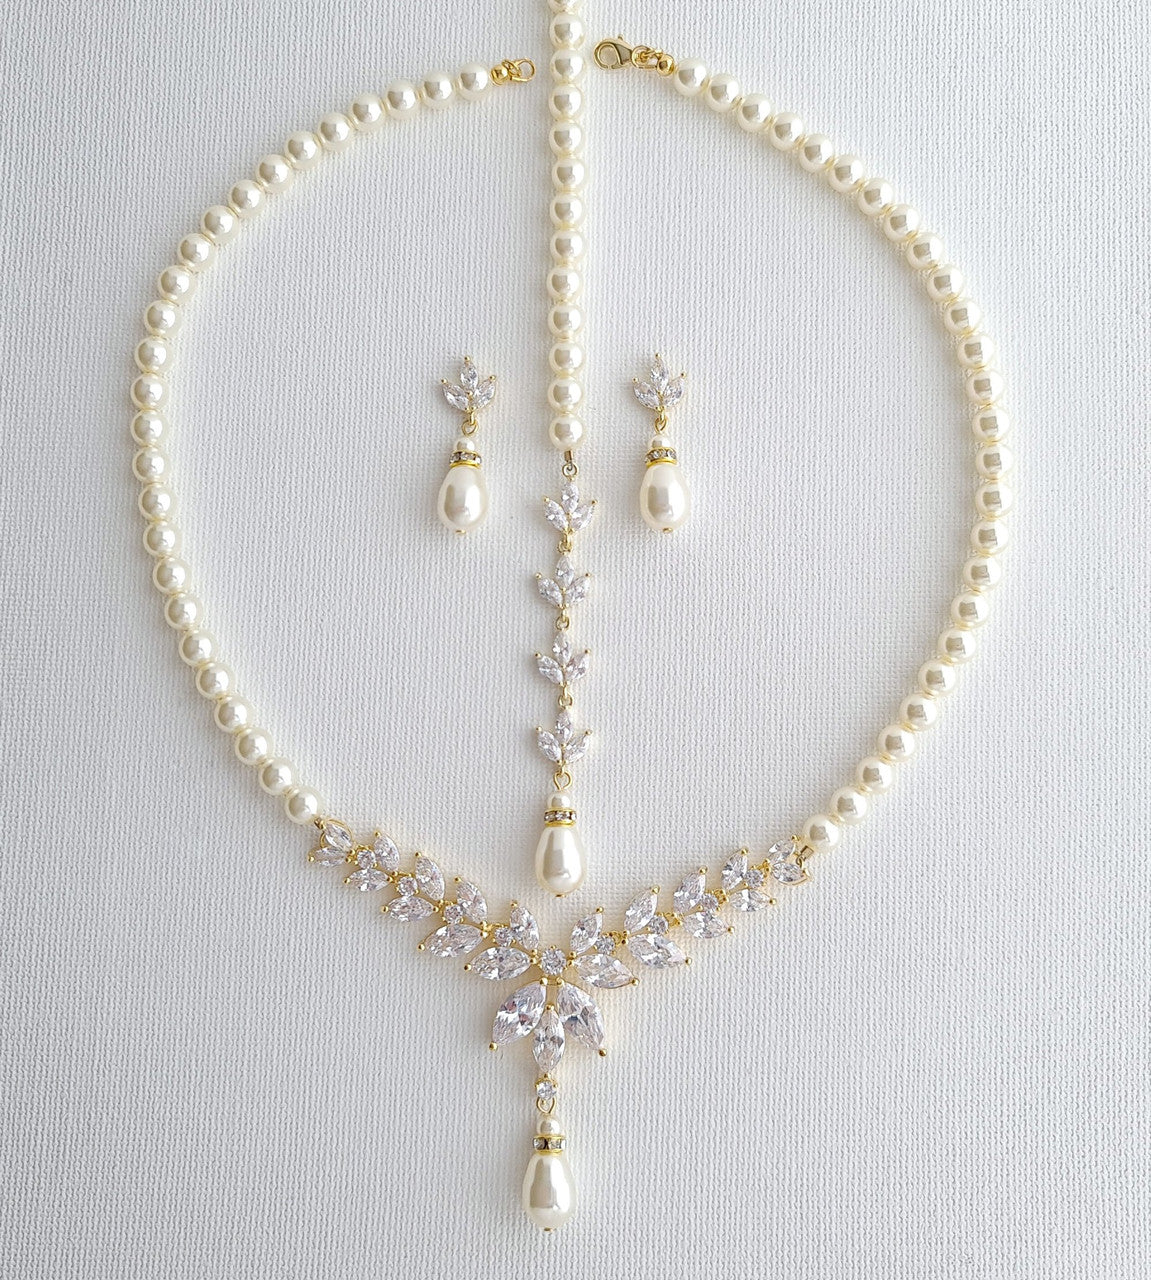 Pearl Necklace and Earrings Wedding Jewelry Set- Katie